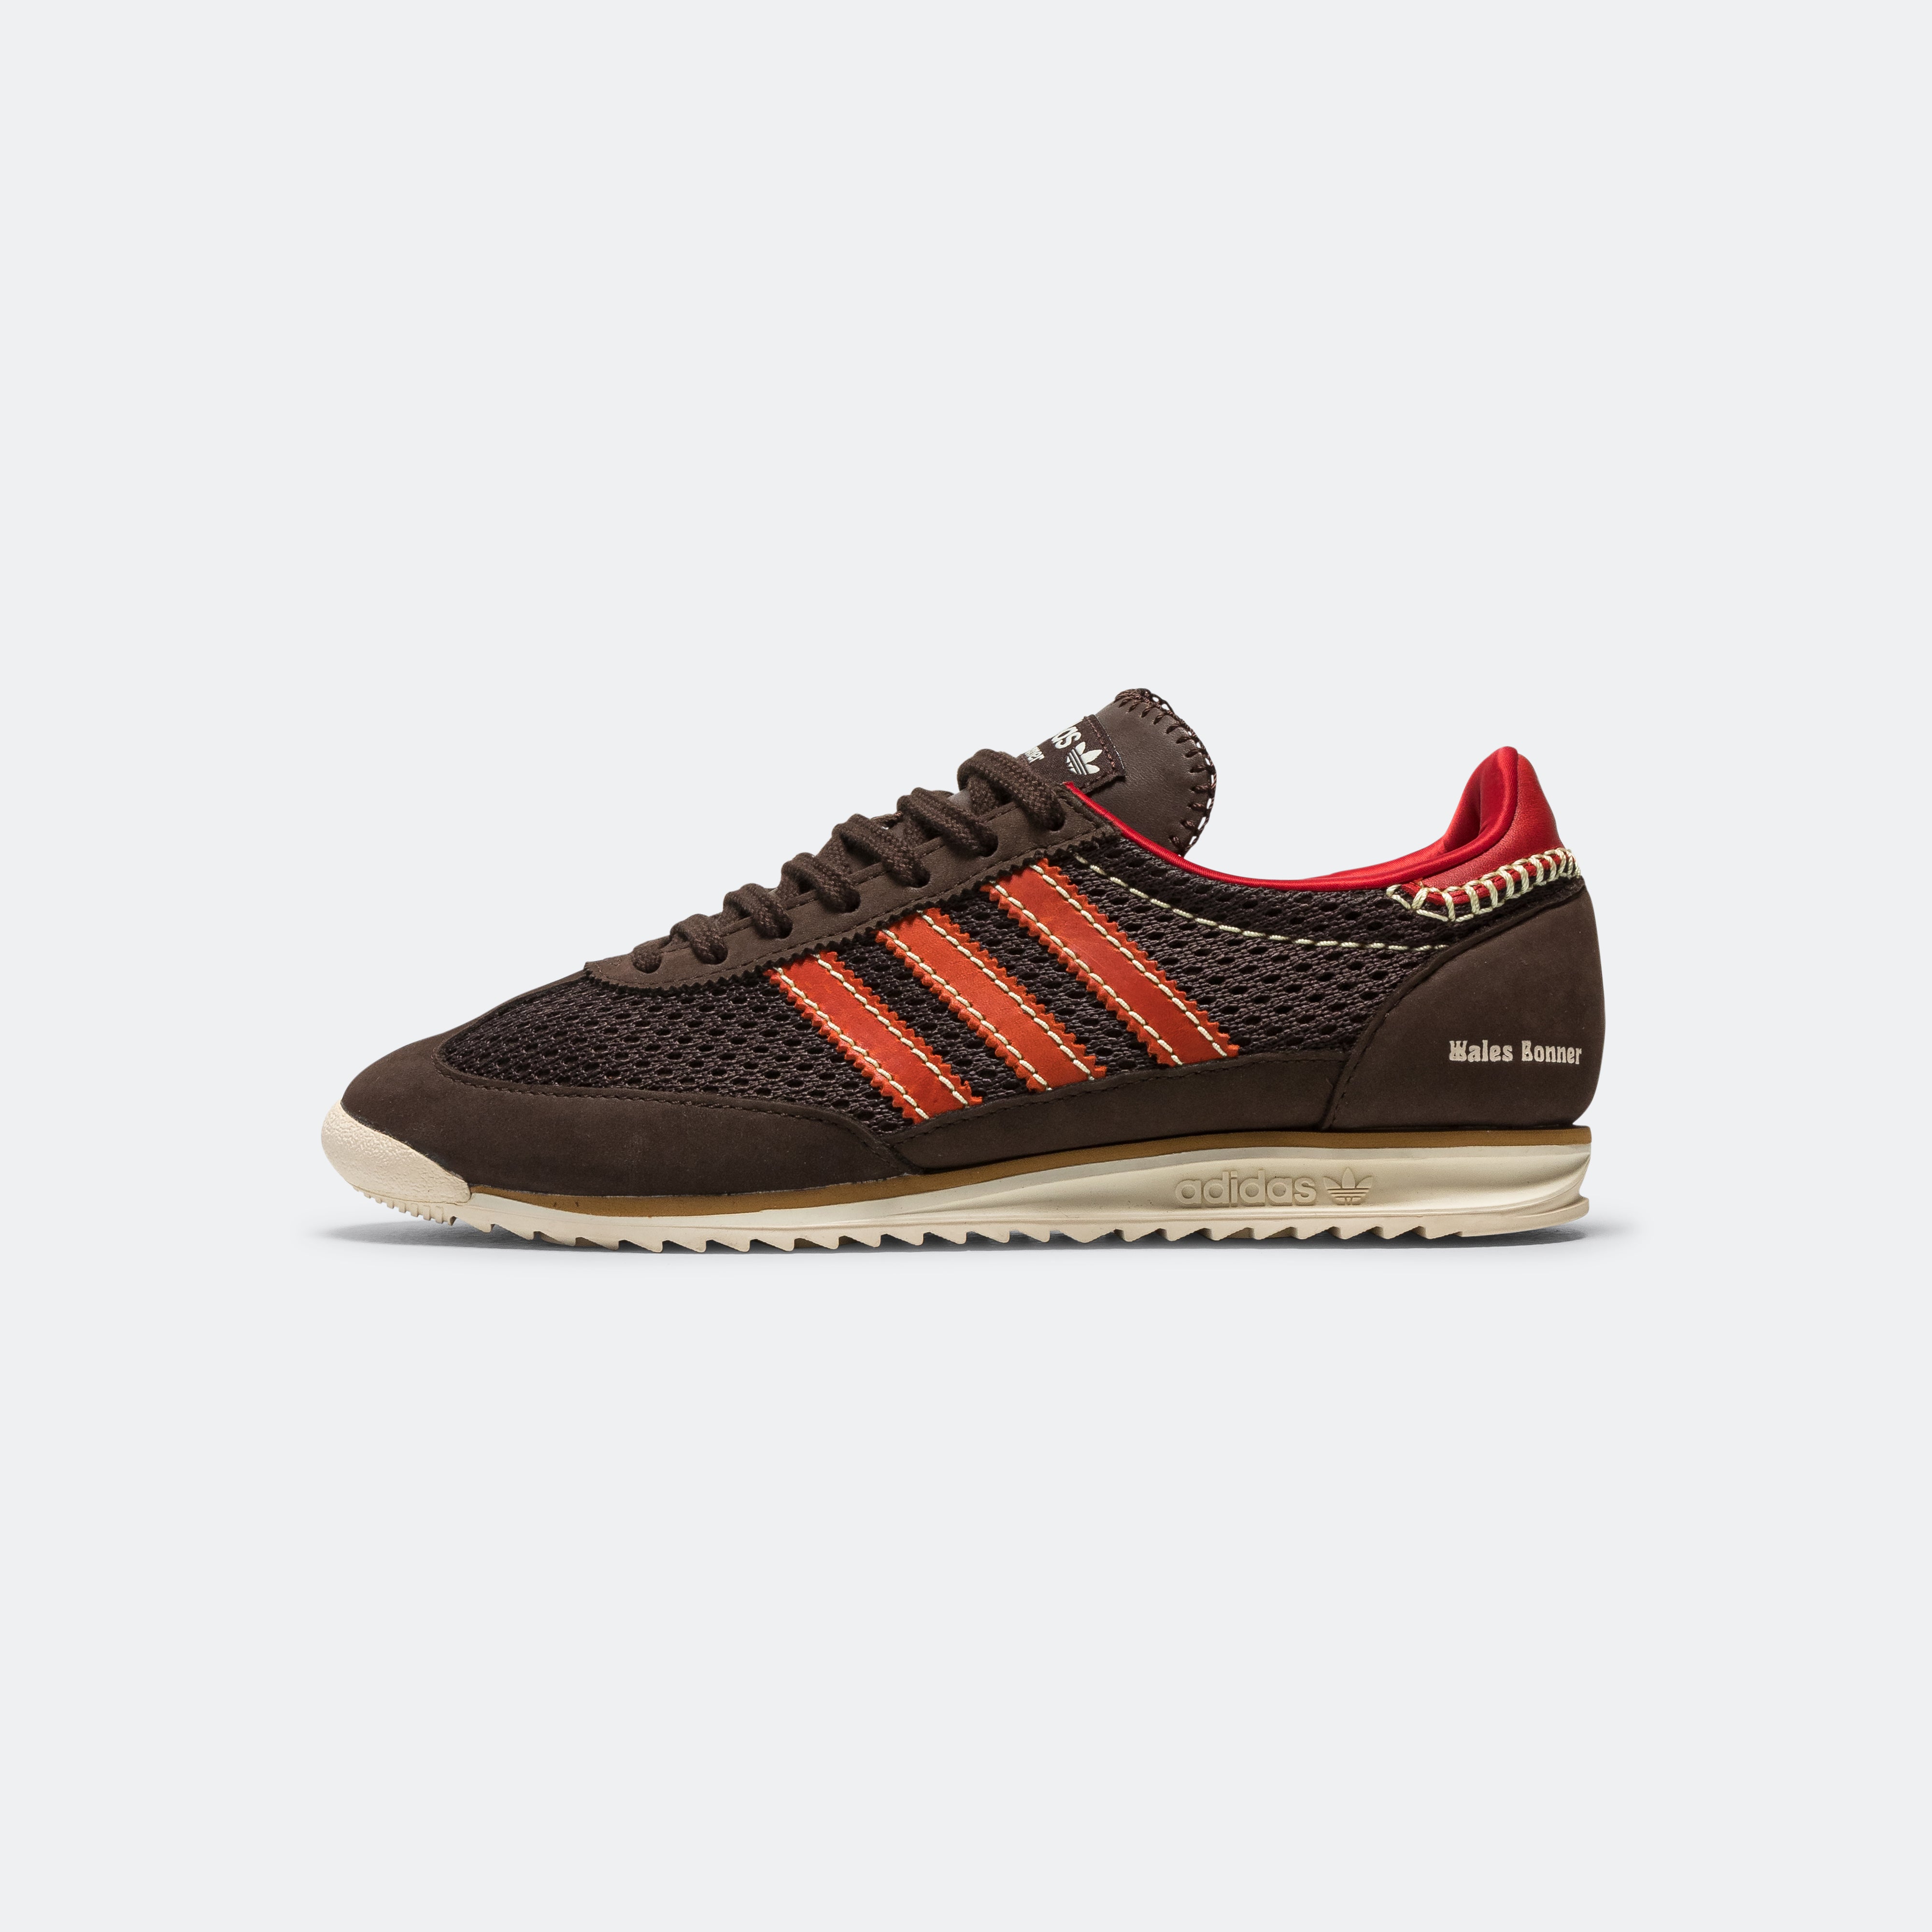 animation blotte bronze Adidas SL72 Knit x Wales Bonner - DBROWN/CORANG-SCARLE | Up There | UP THERE